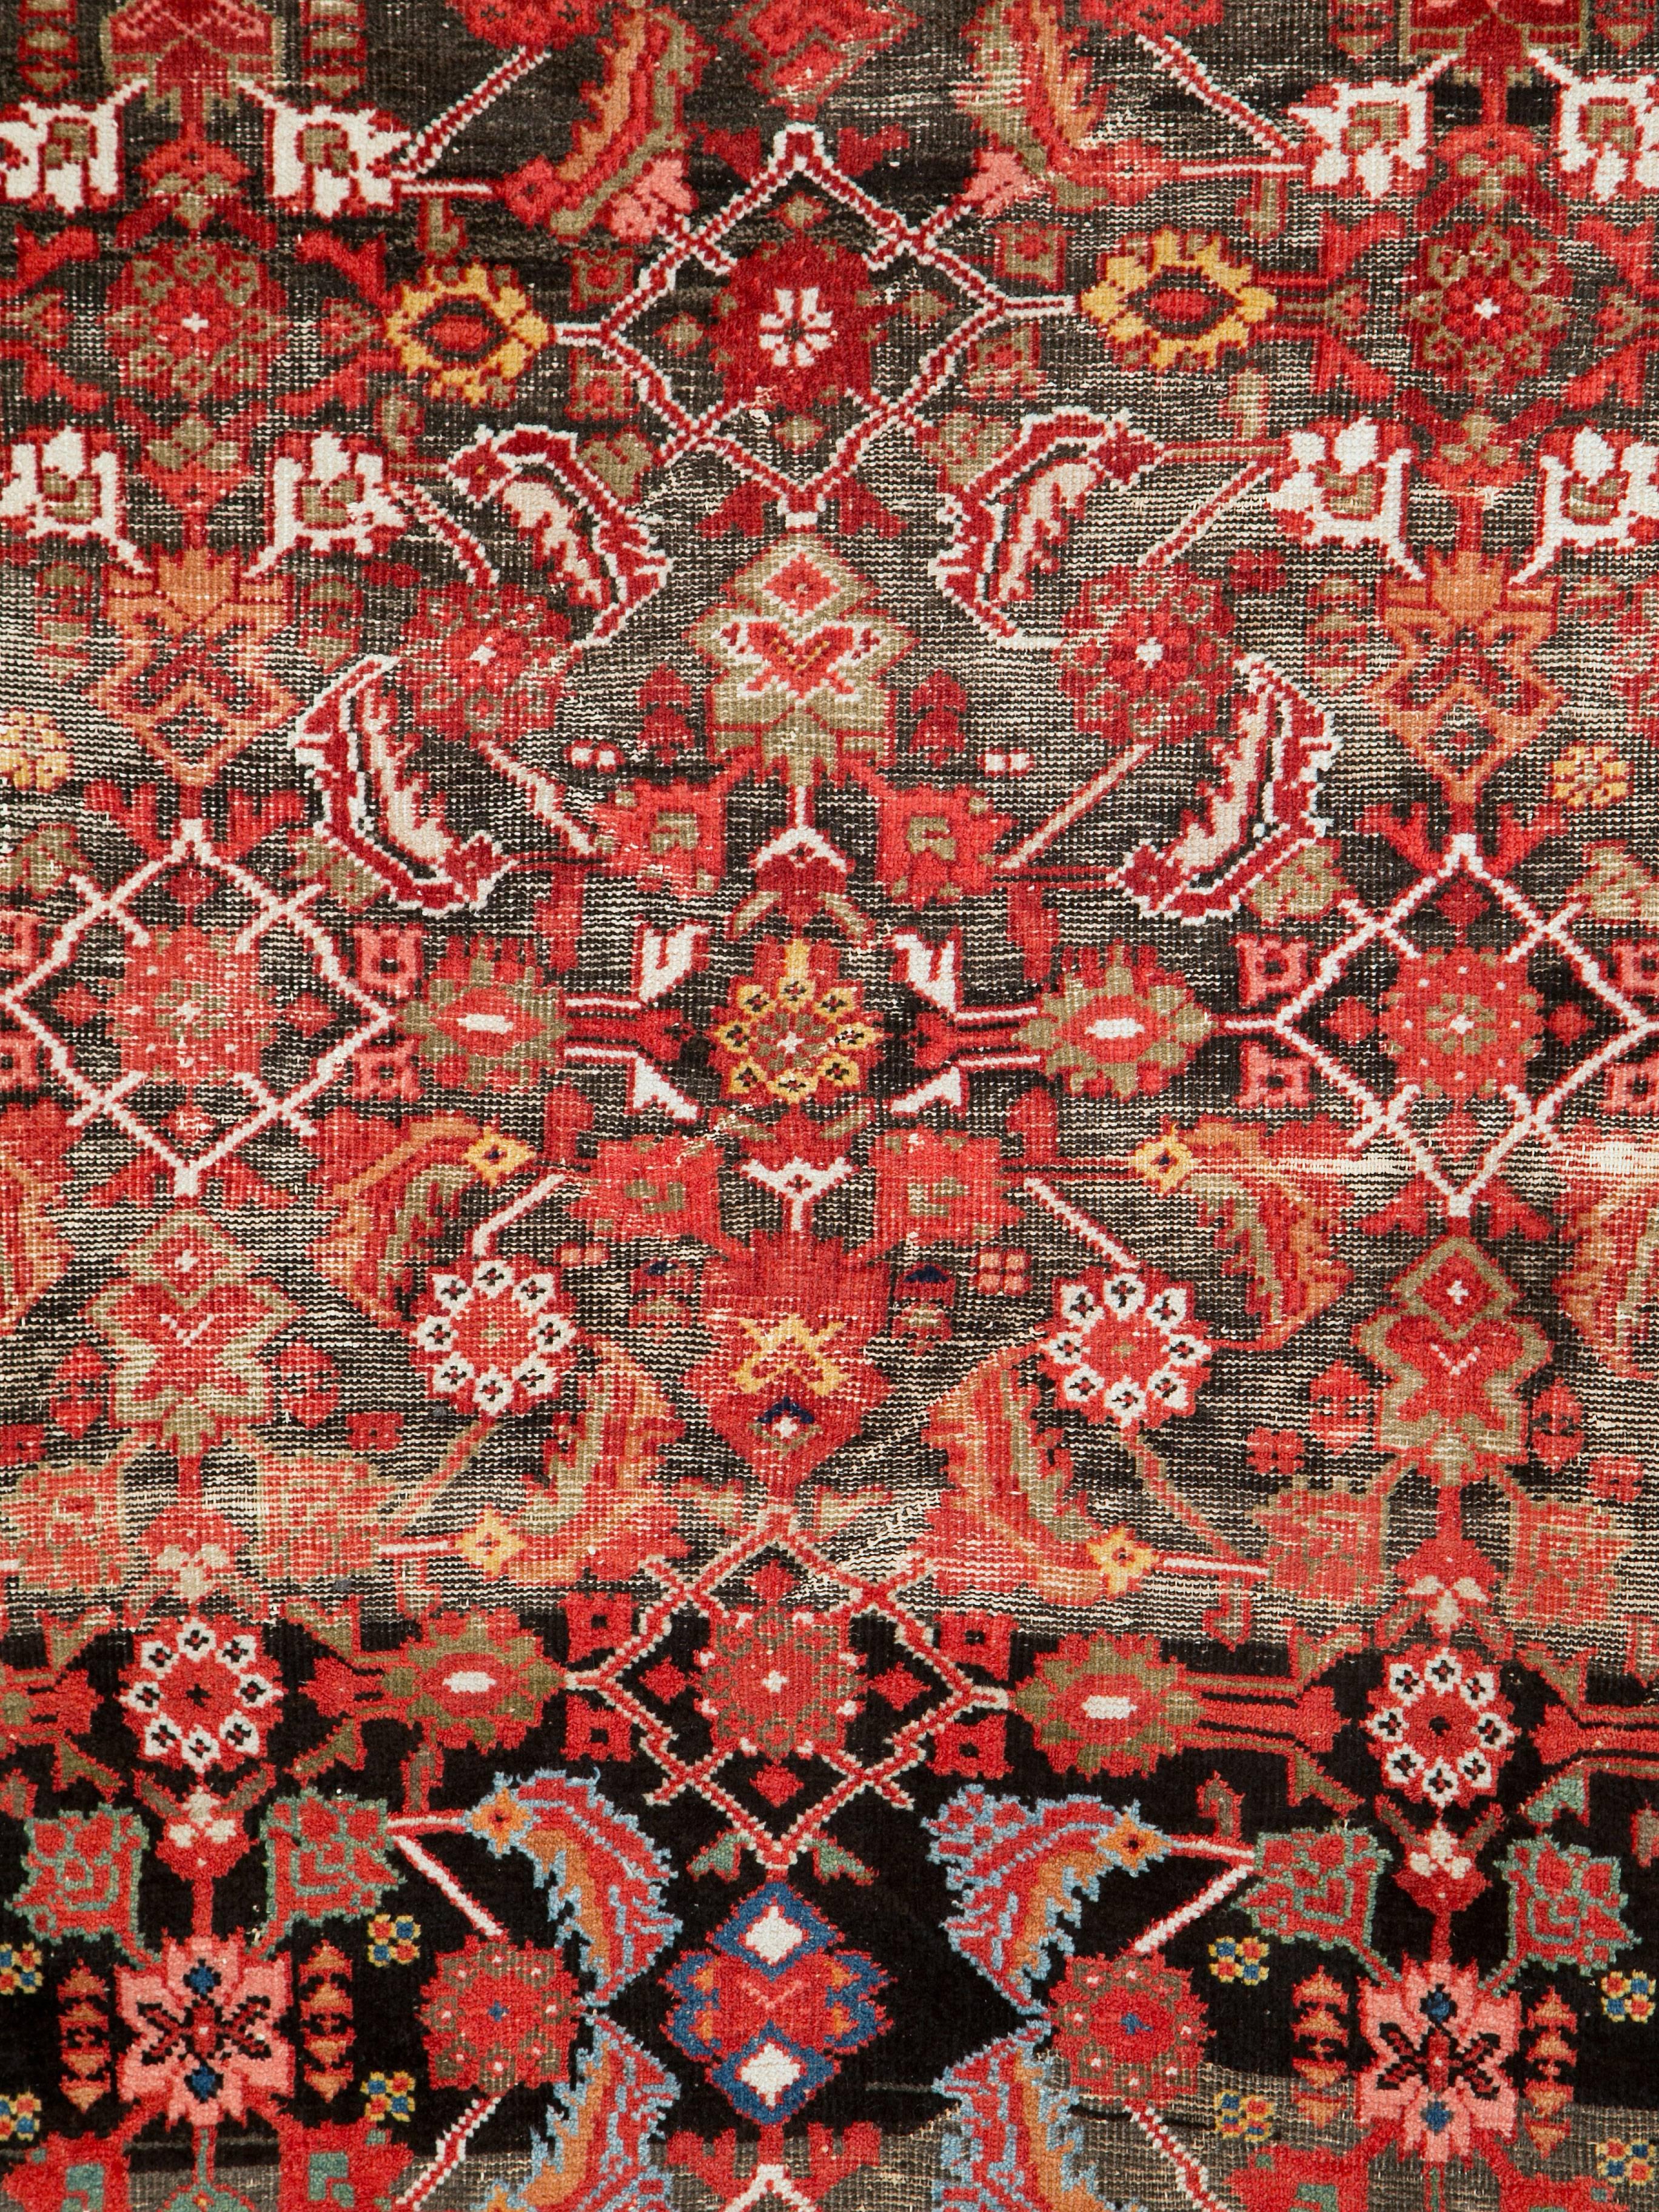 An antique Persian Mahal carpet from the first quarter of the 20th century with a weathered and distressed appeal.